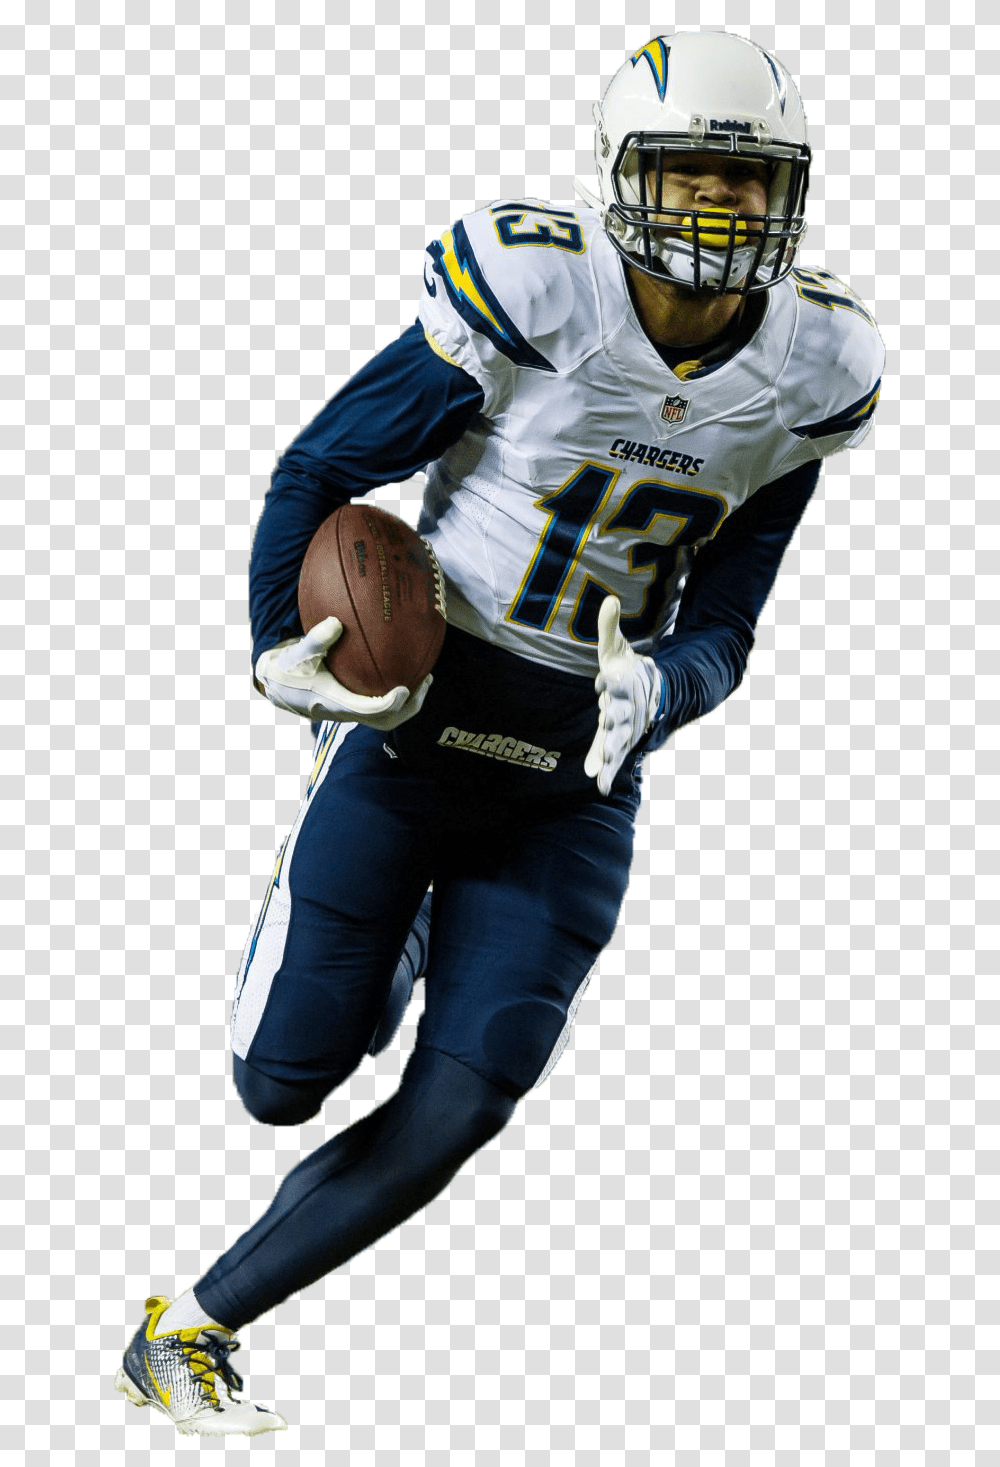 Nfl Players Image Nfl Football Player, Helmet, Clothing, Apparel, Person Transparent Png